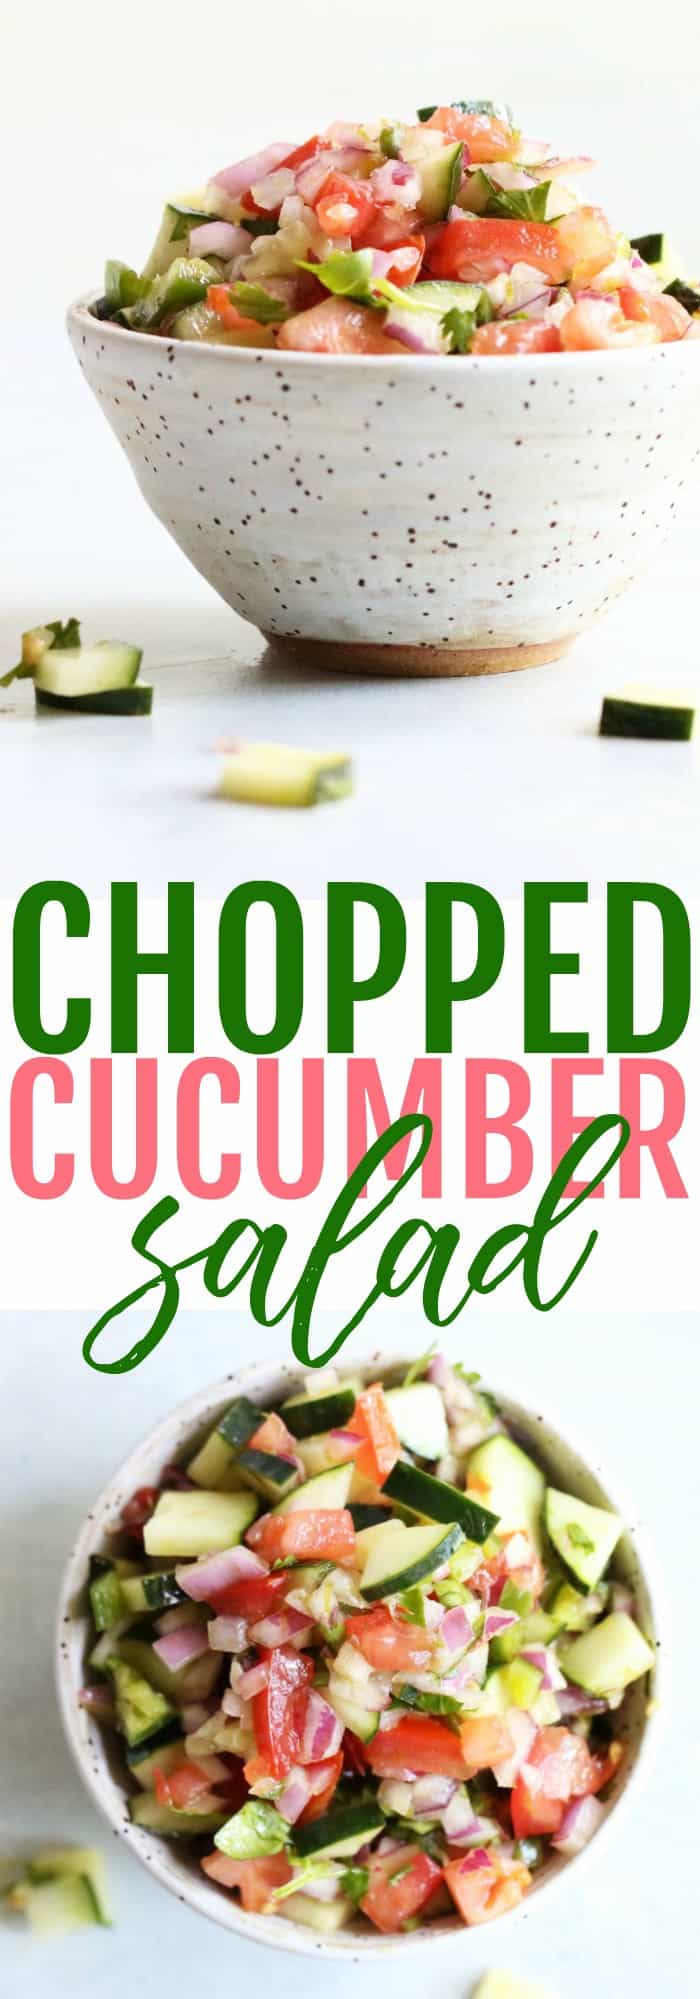 Make this refreshing and delicious Chopped Cucumber Salad for a tasty summer side. It's whole 30, paleo, and also makes for a fun cucumber salsa! thetoastedpinenut.com